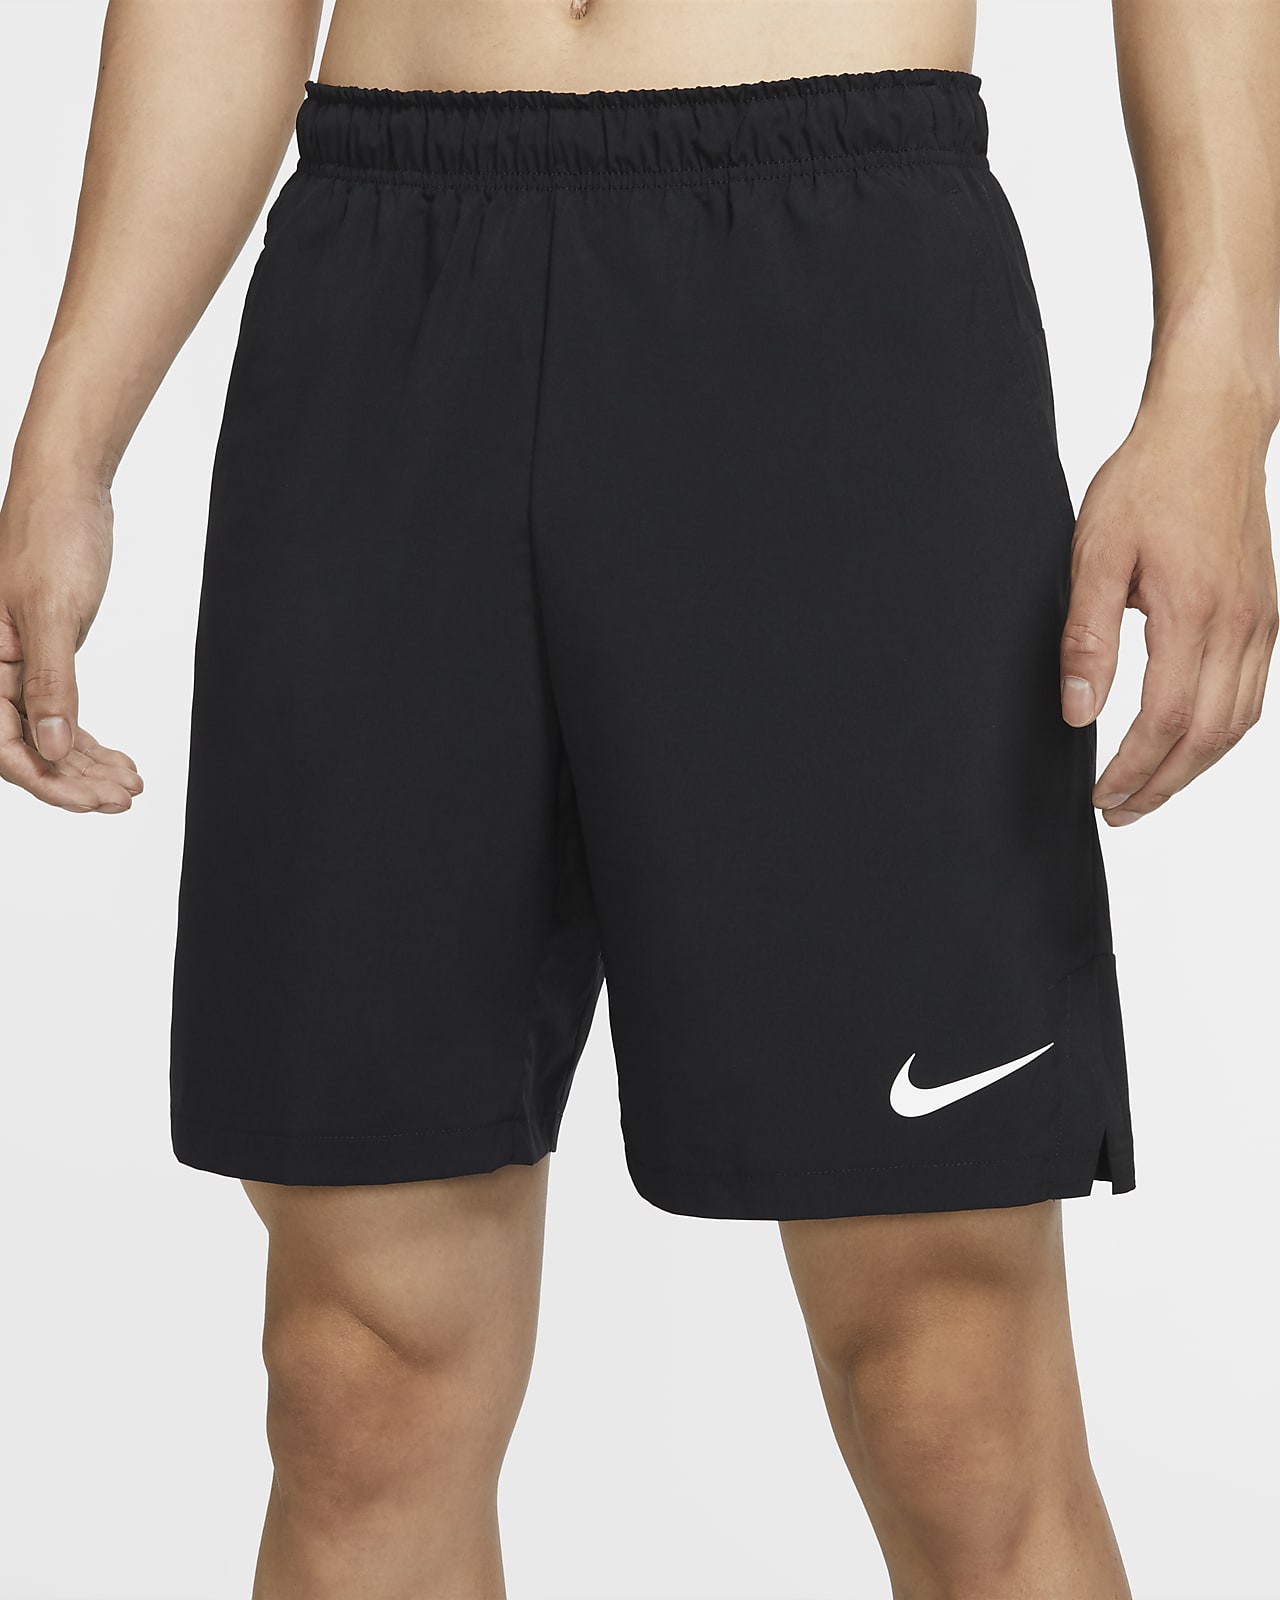 nike shorts with cell phone pocket